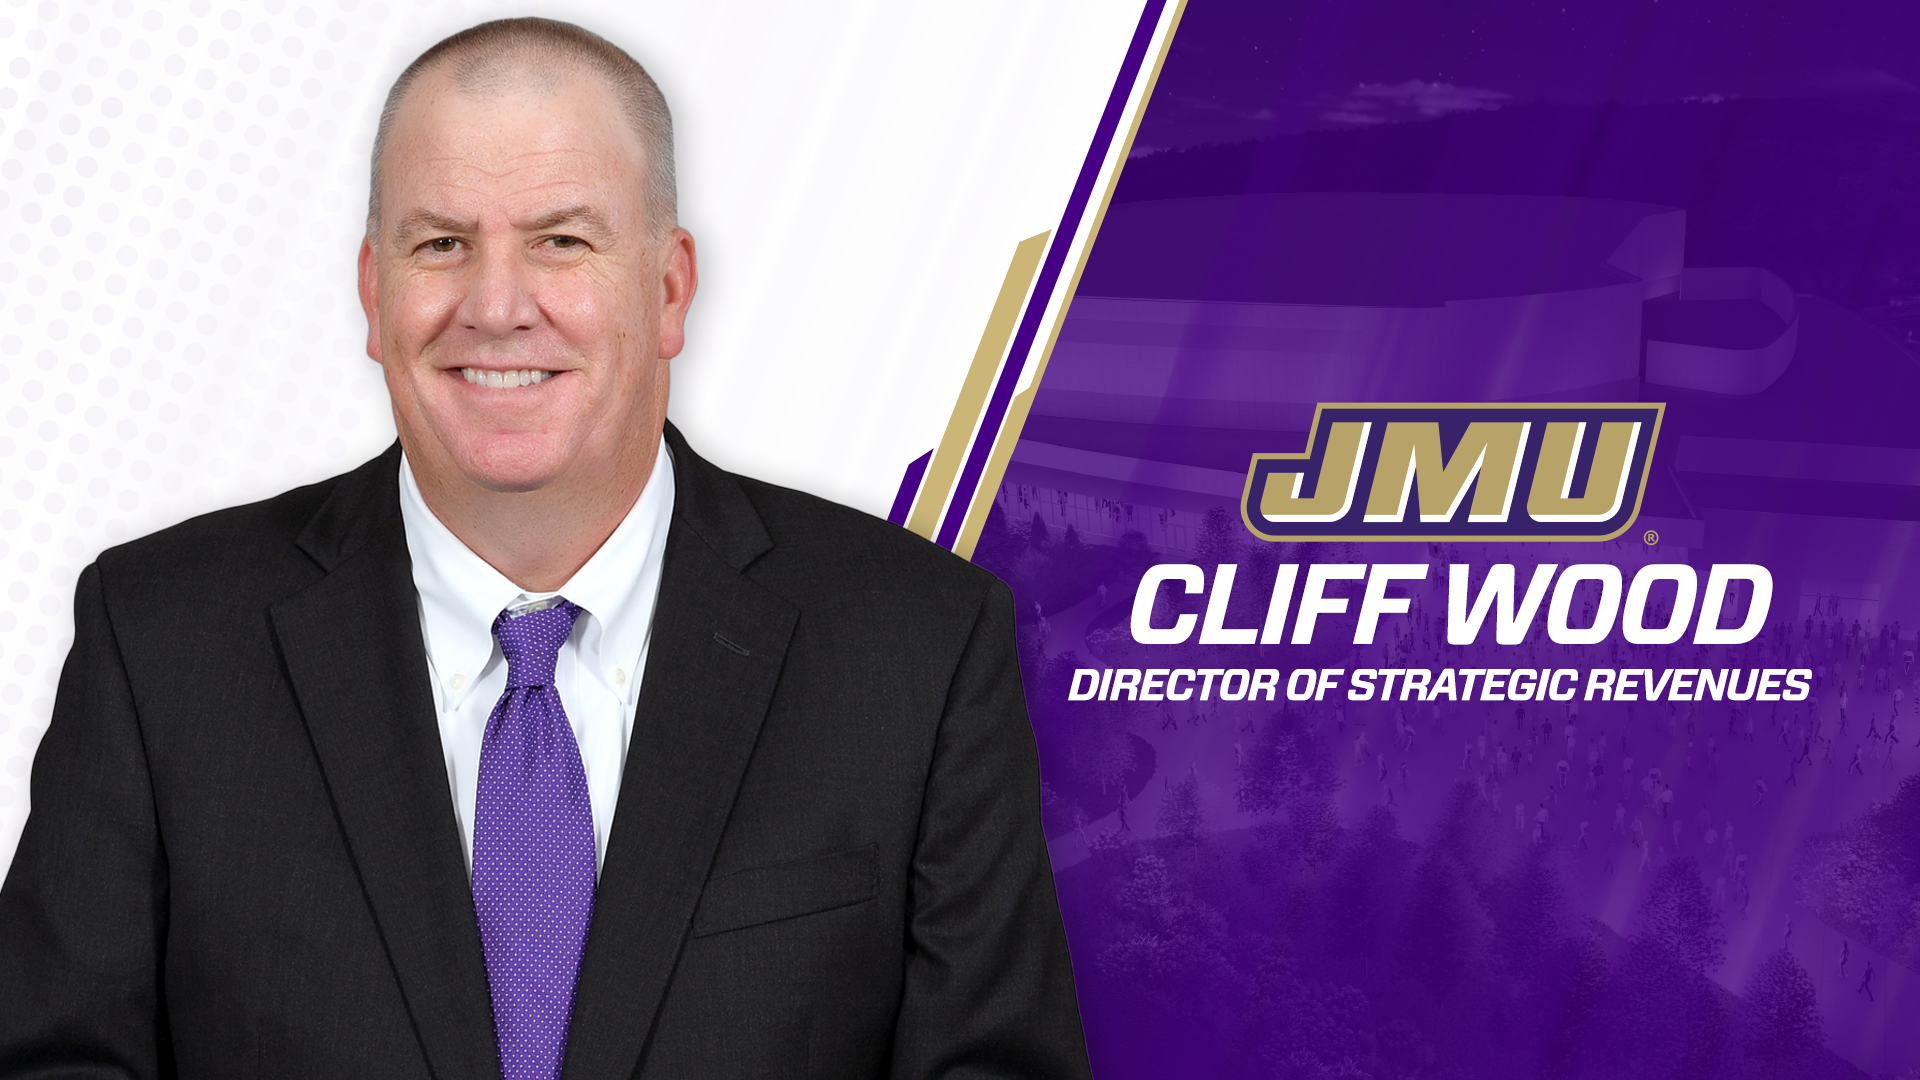 Cliff Wood Named Director Of Strategic Revenues James Madison